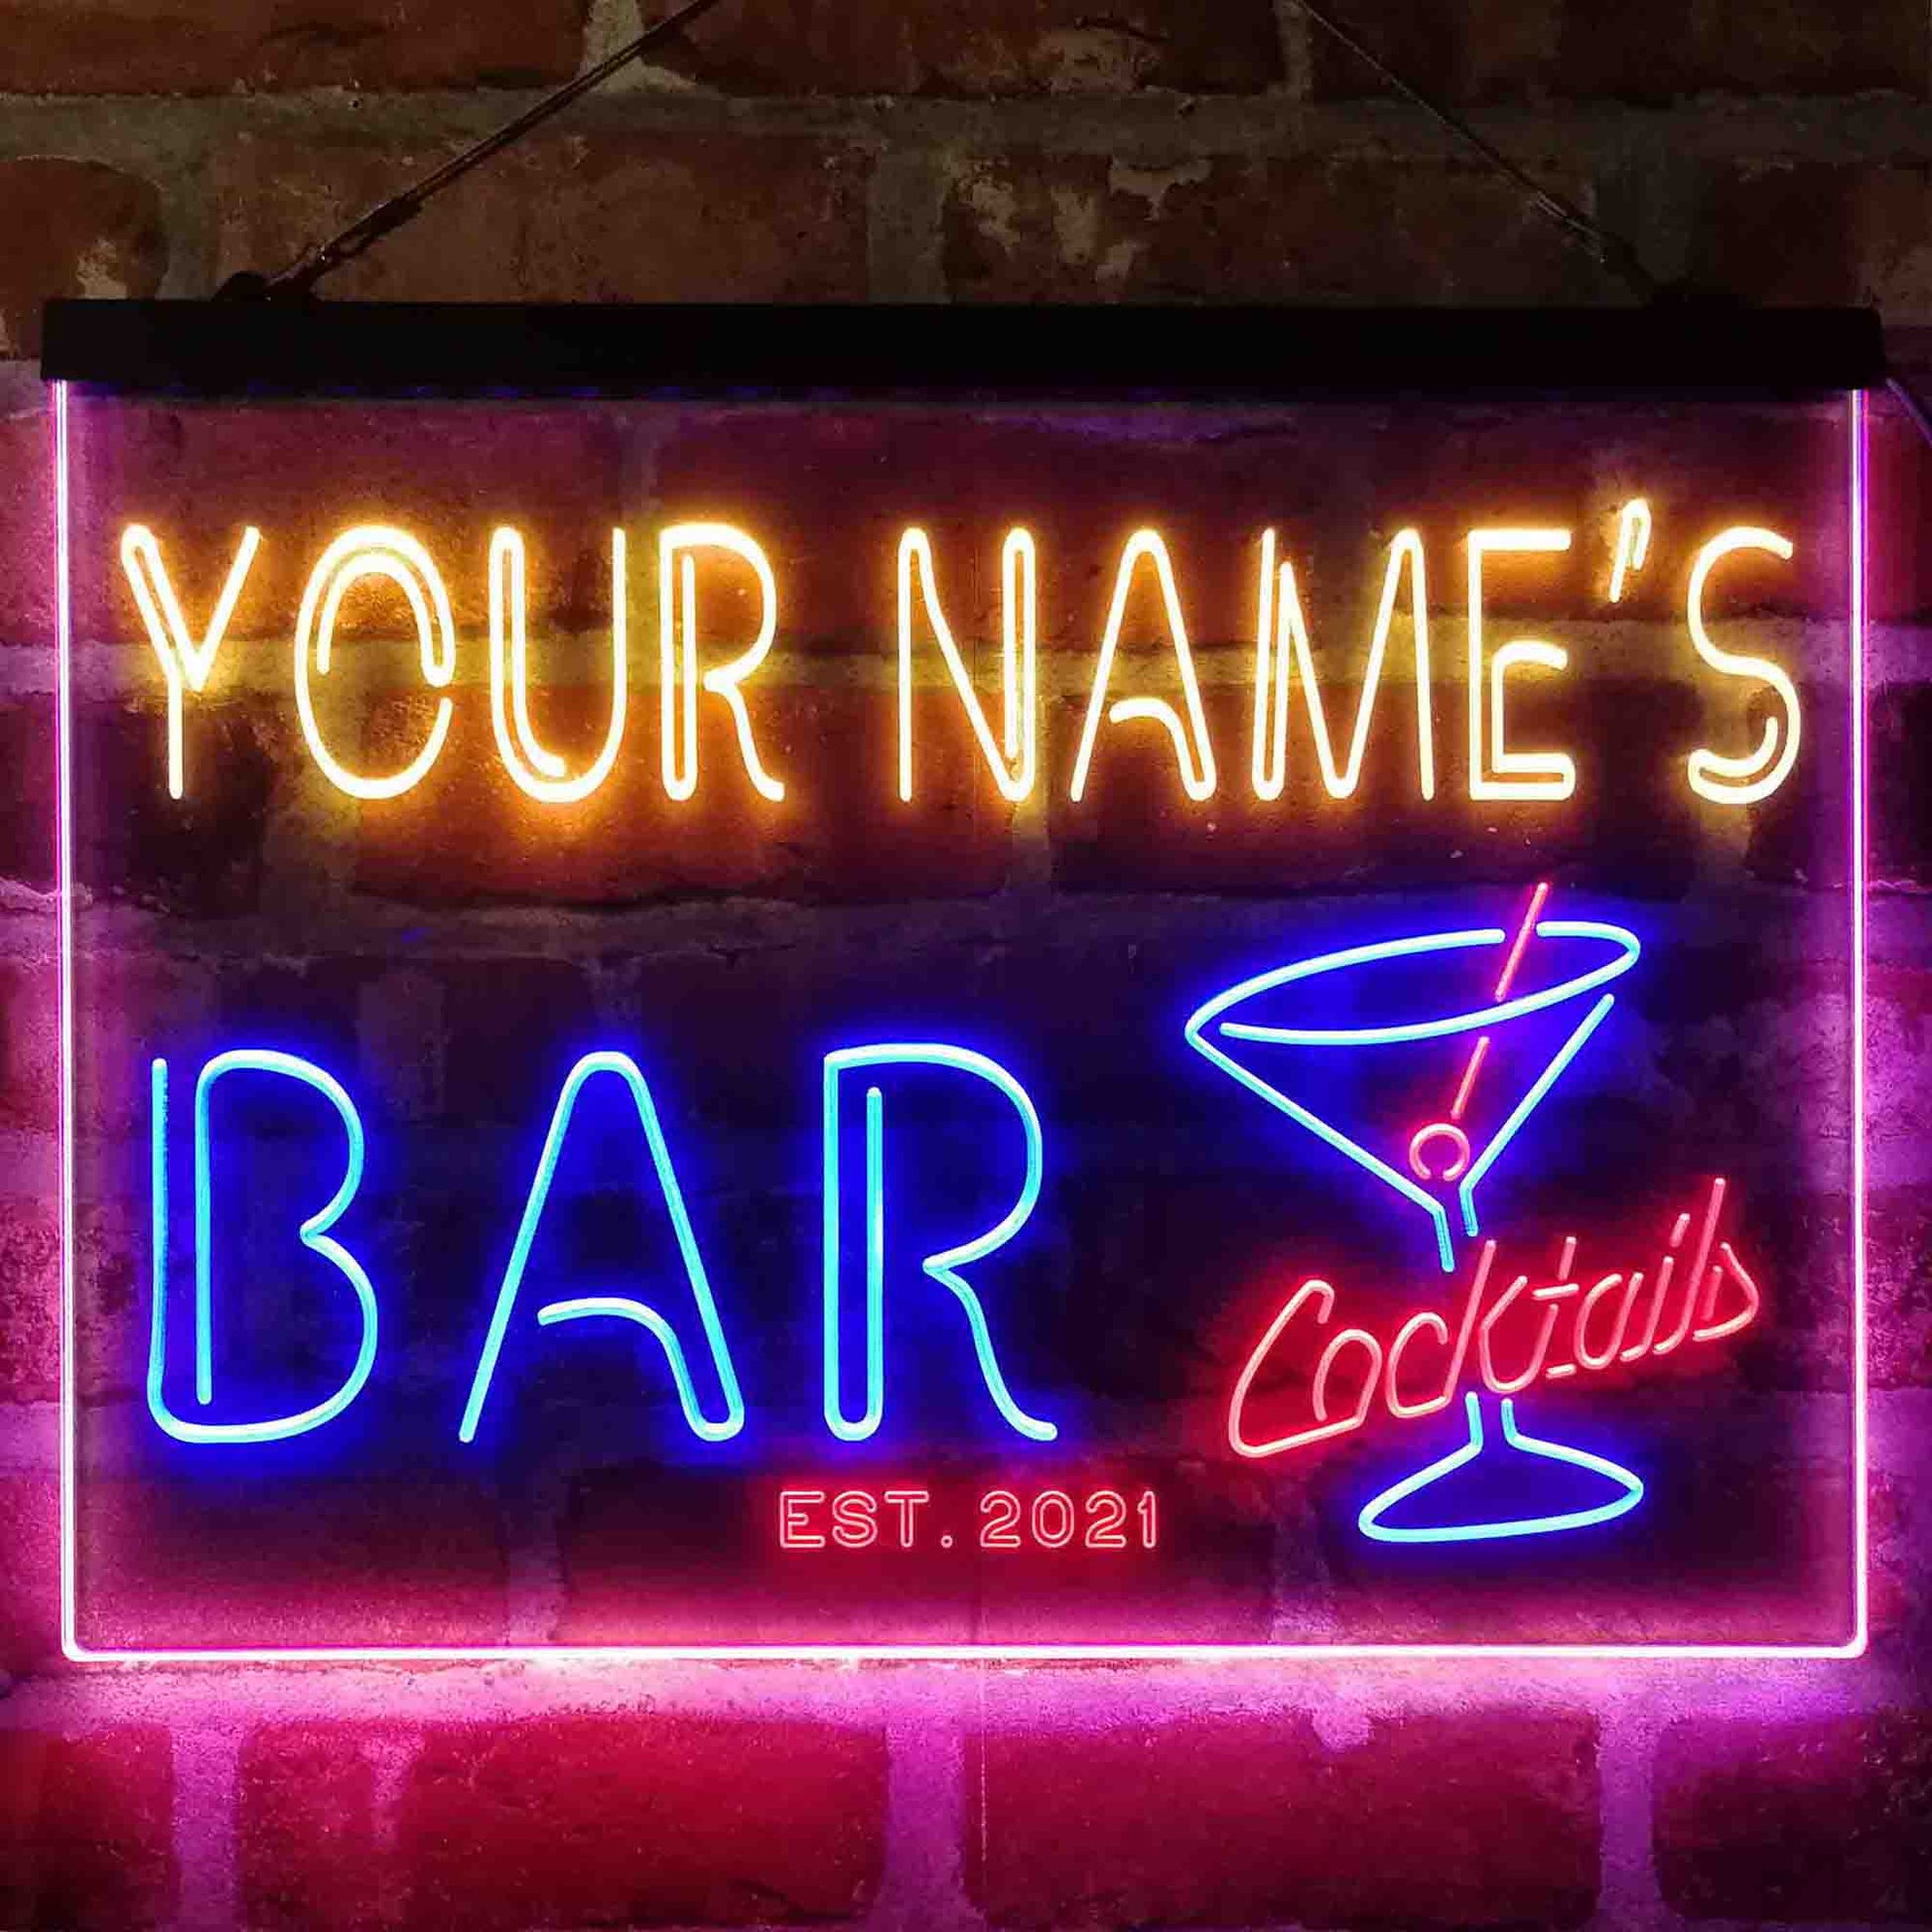 Personalized Cocktail Glass Bar 3-Color LED Neon Light Sign - Way Up Gifts